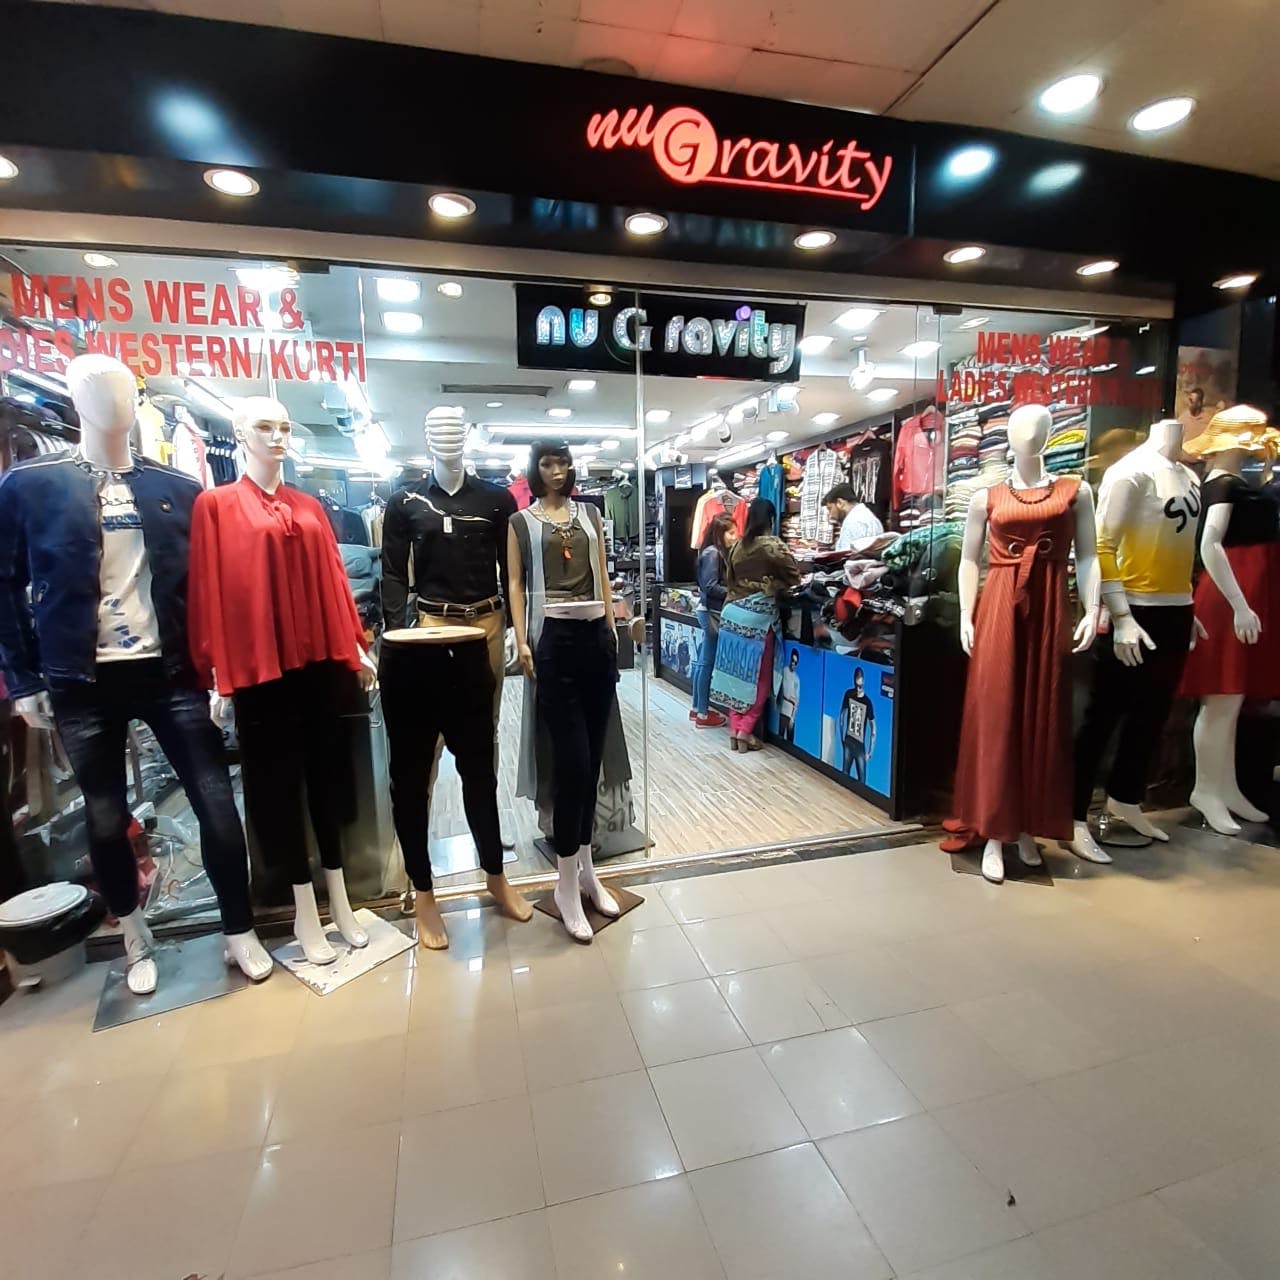 Shopping mall,Outlet store,Shopping,Retail,Building,Boutique,Sportswear,Event,Jeans,City